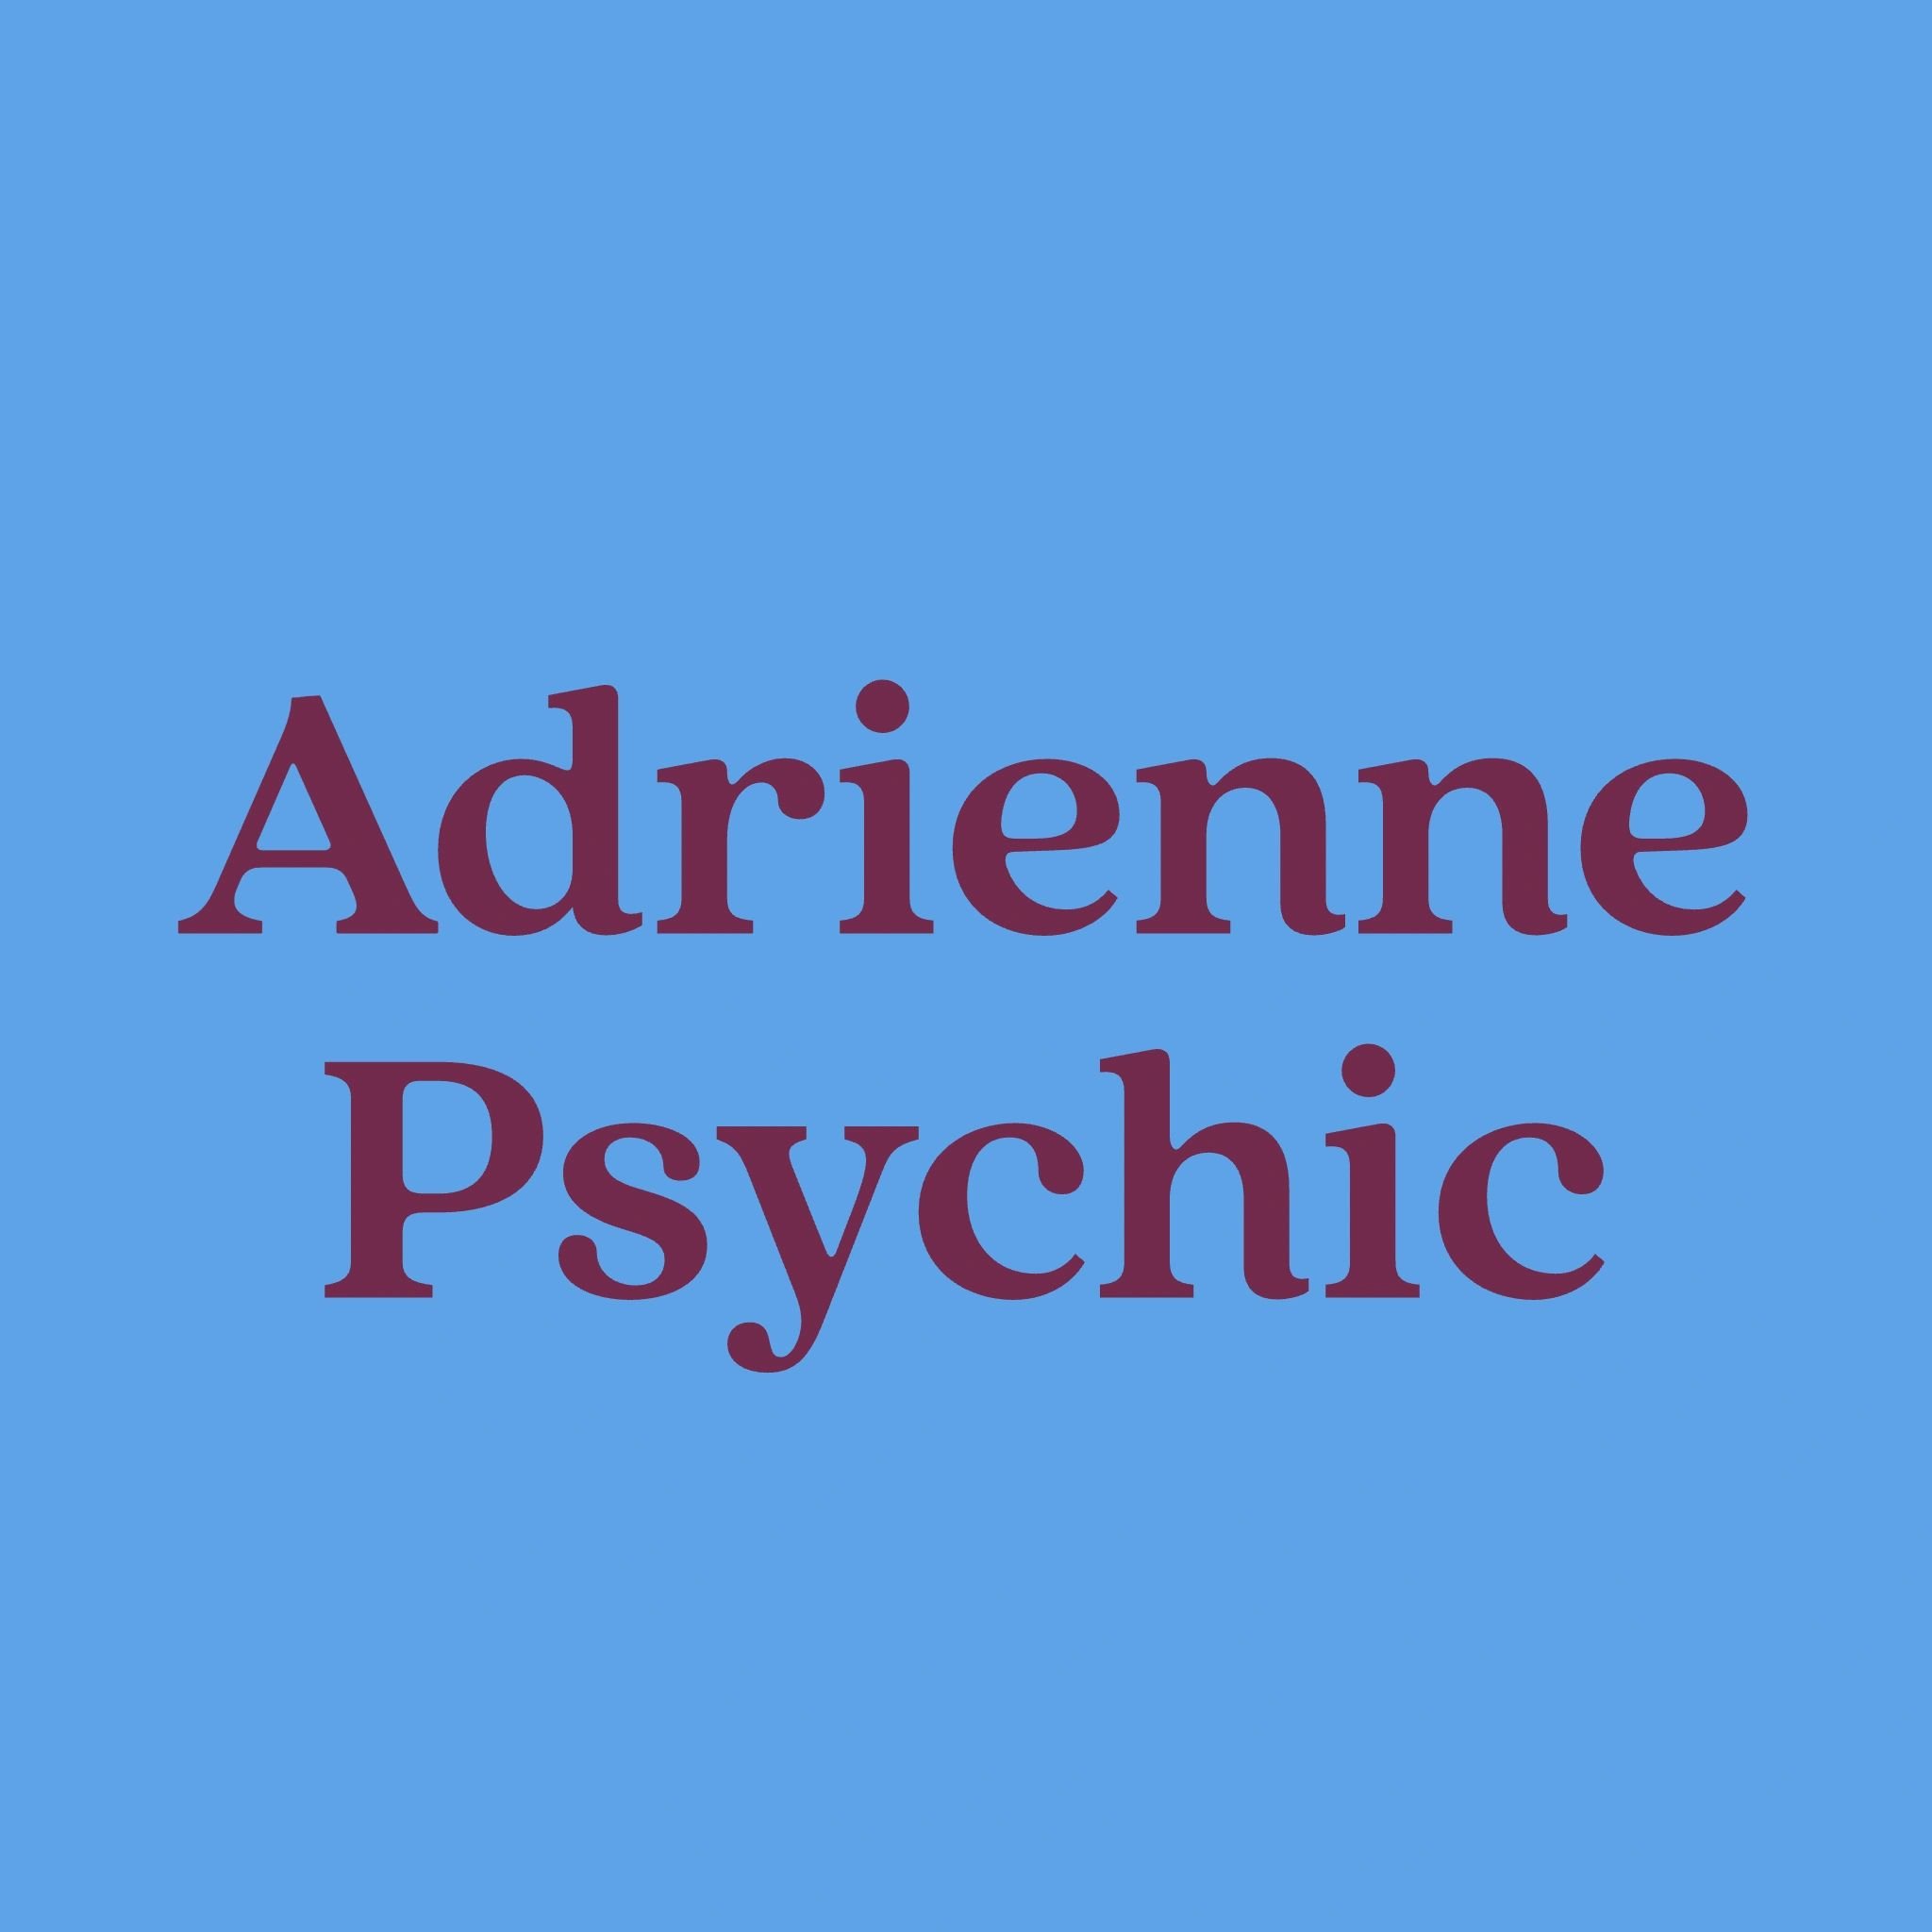 Adrienne offers 30, 45, and 60-minute phone or FaceTime readings to guide and uplift you on your journey. Reach out to find insight and clarity.